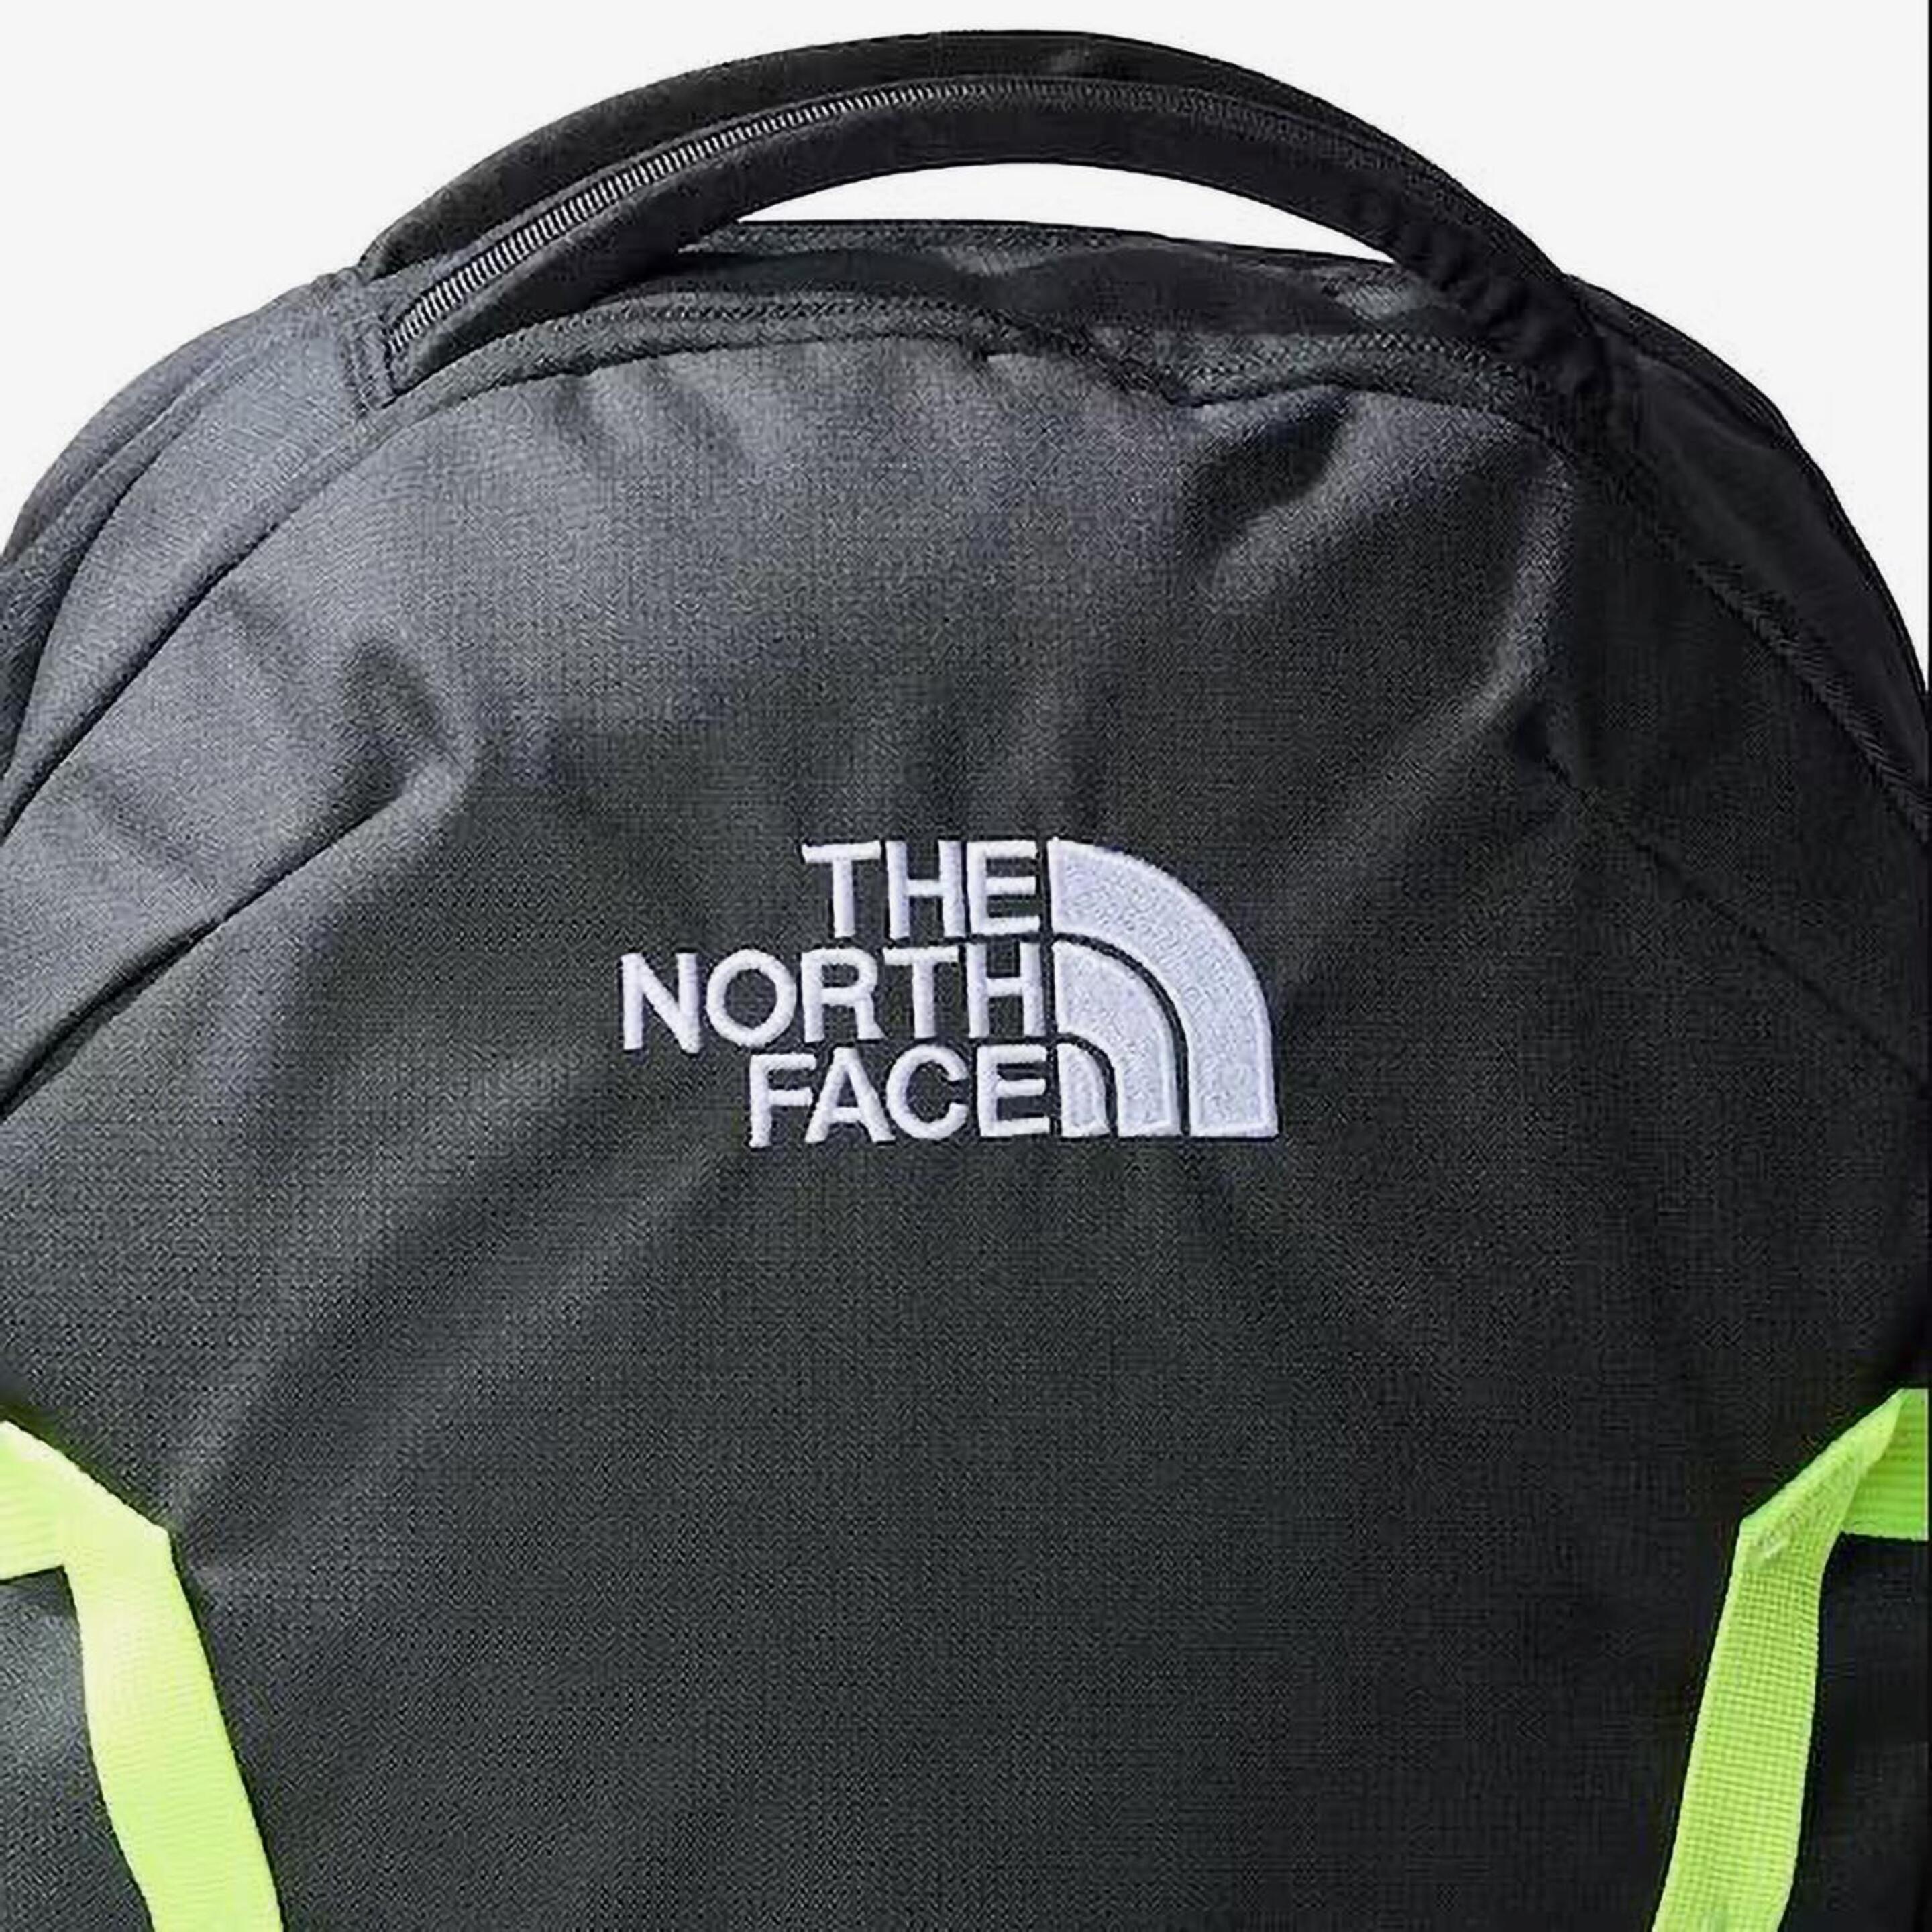 The The North Face Vault